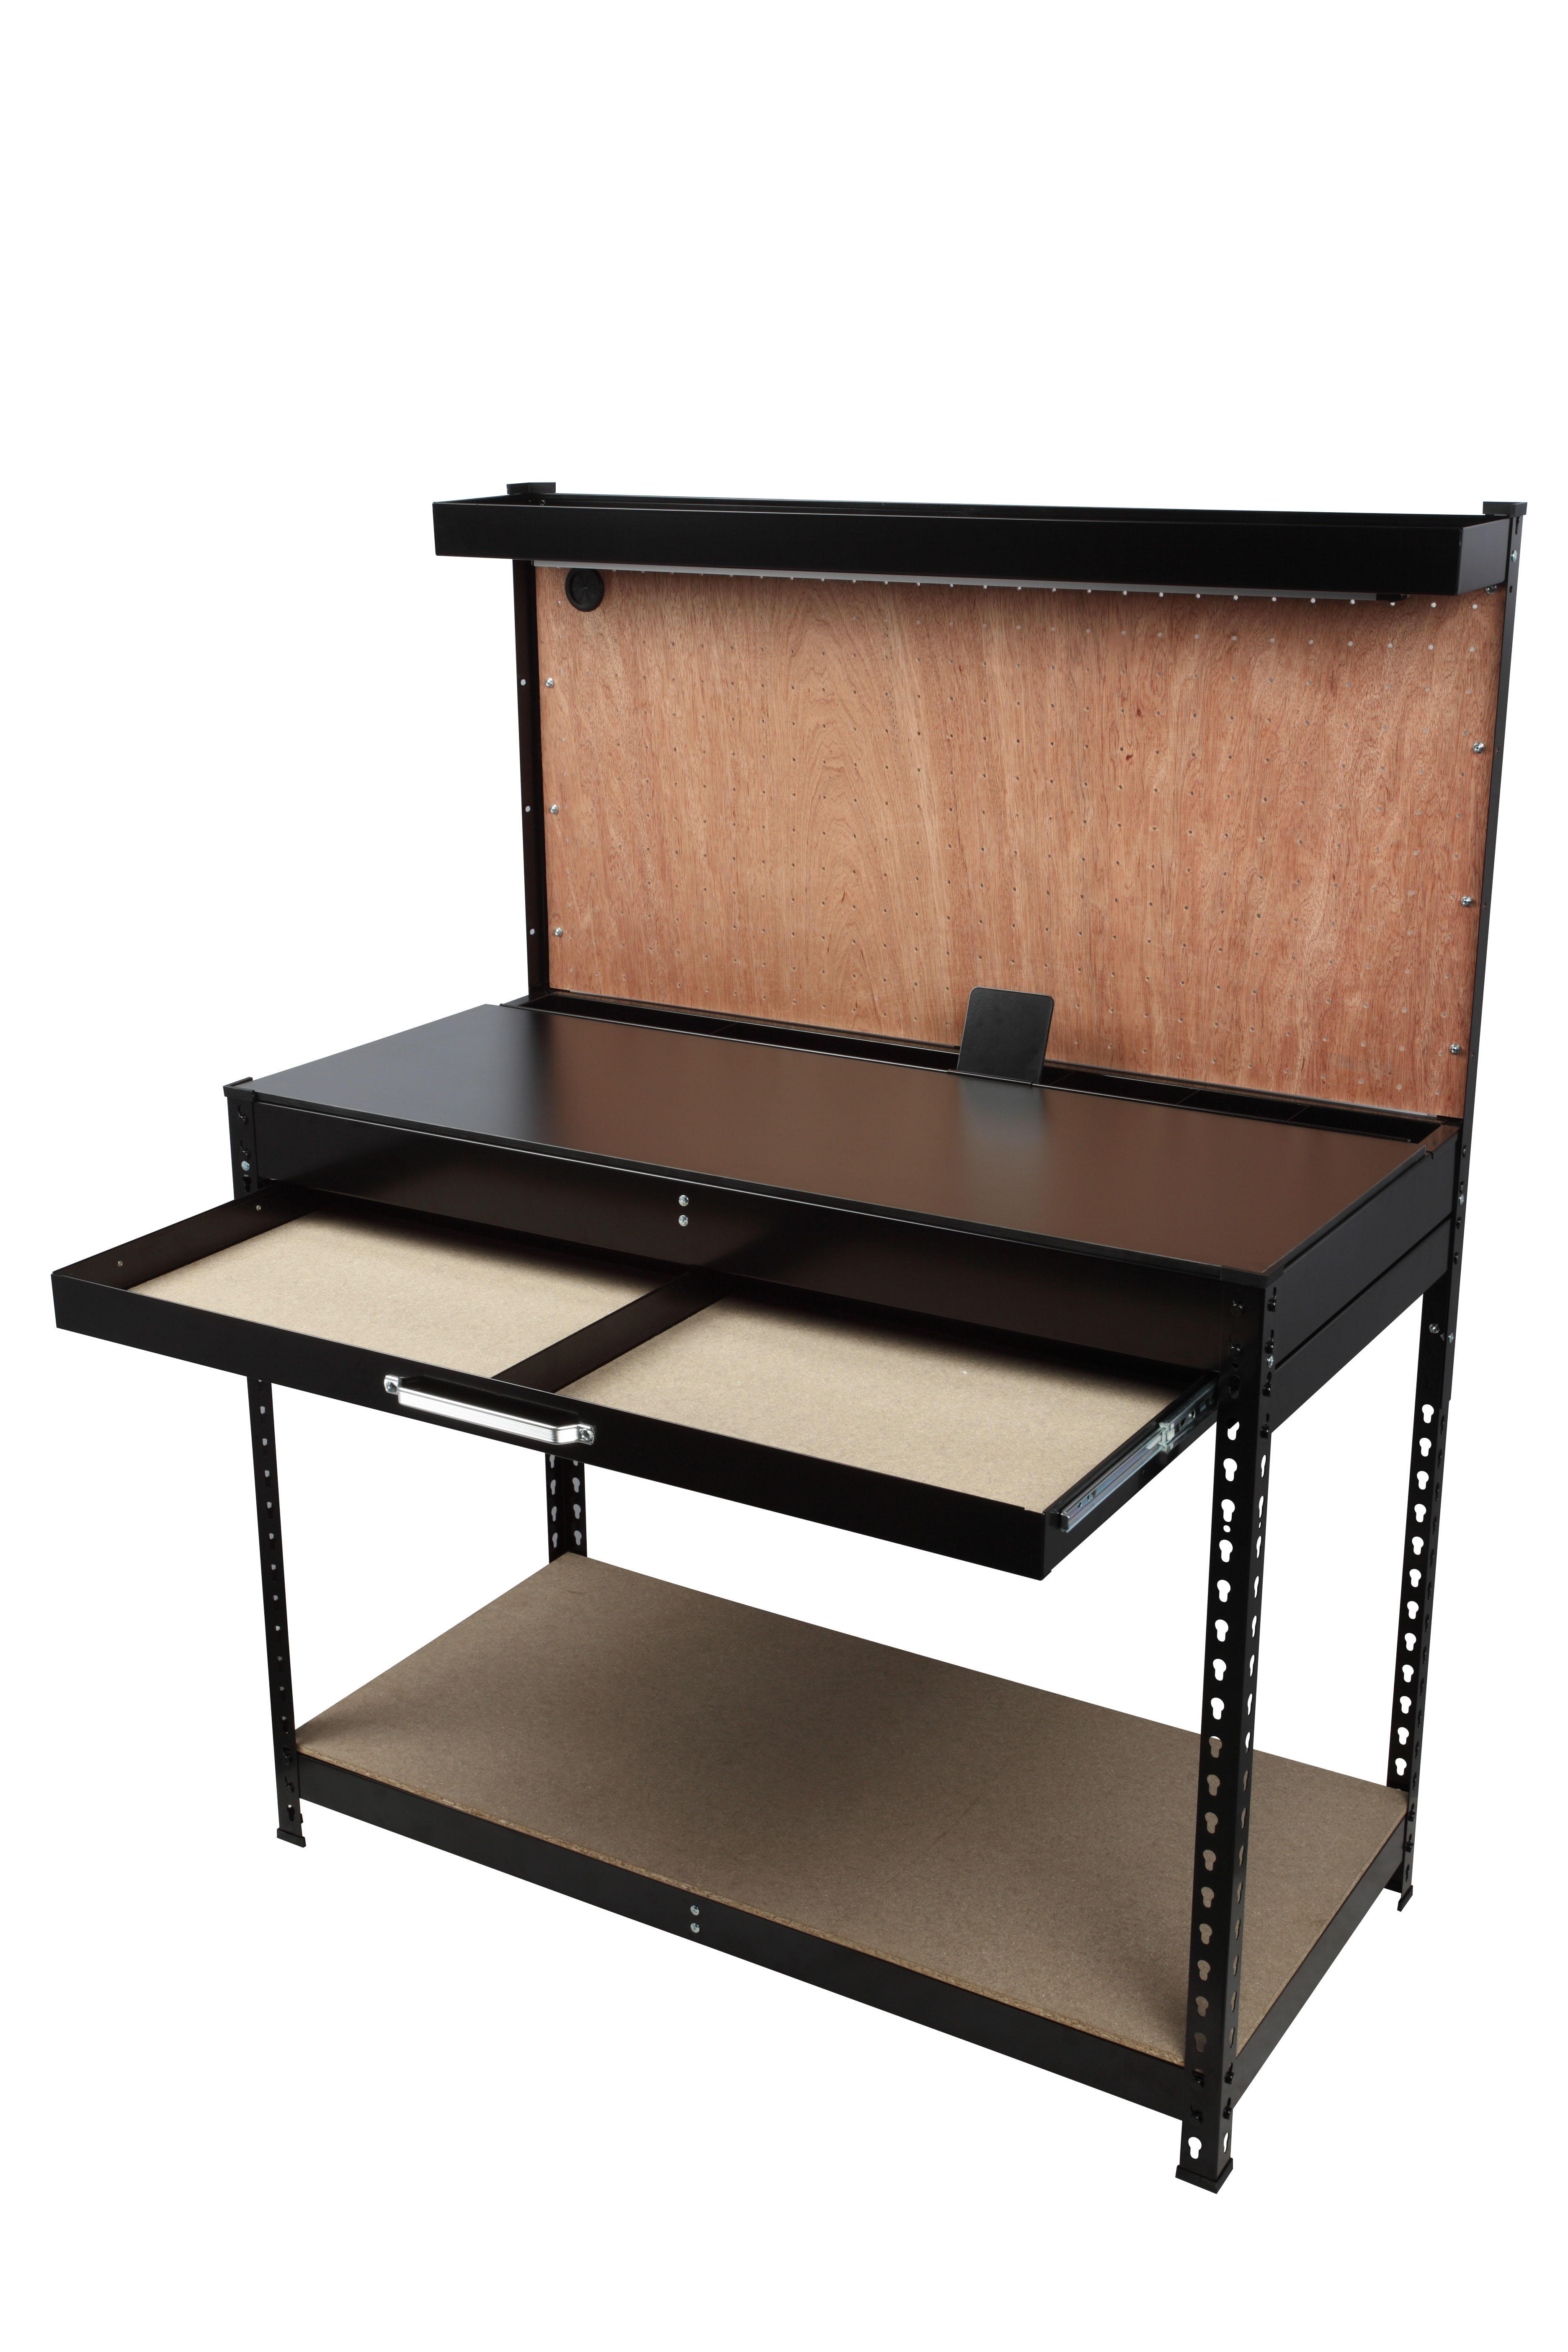 Hyper Tough 46-Inch Easy Assembly Workbench with LED Light, Peg Hooks and Drawer Liners - image 3 of 7